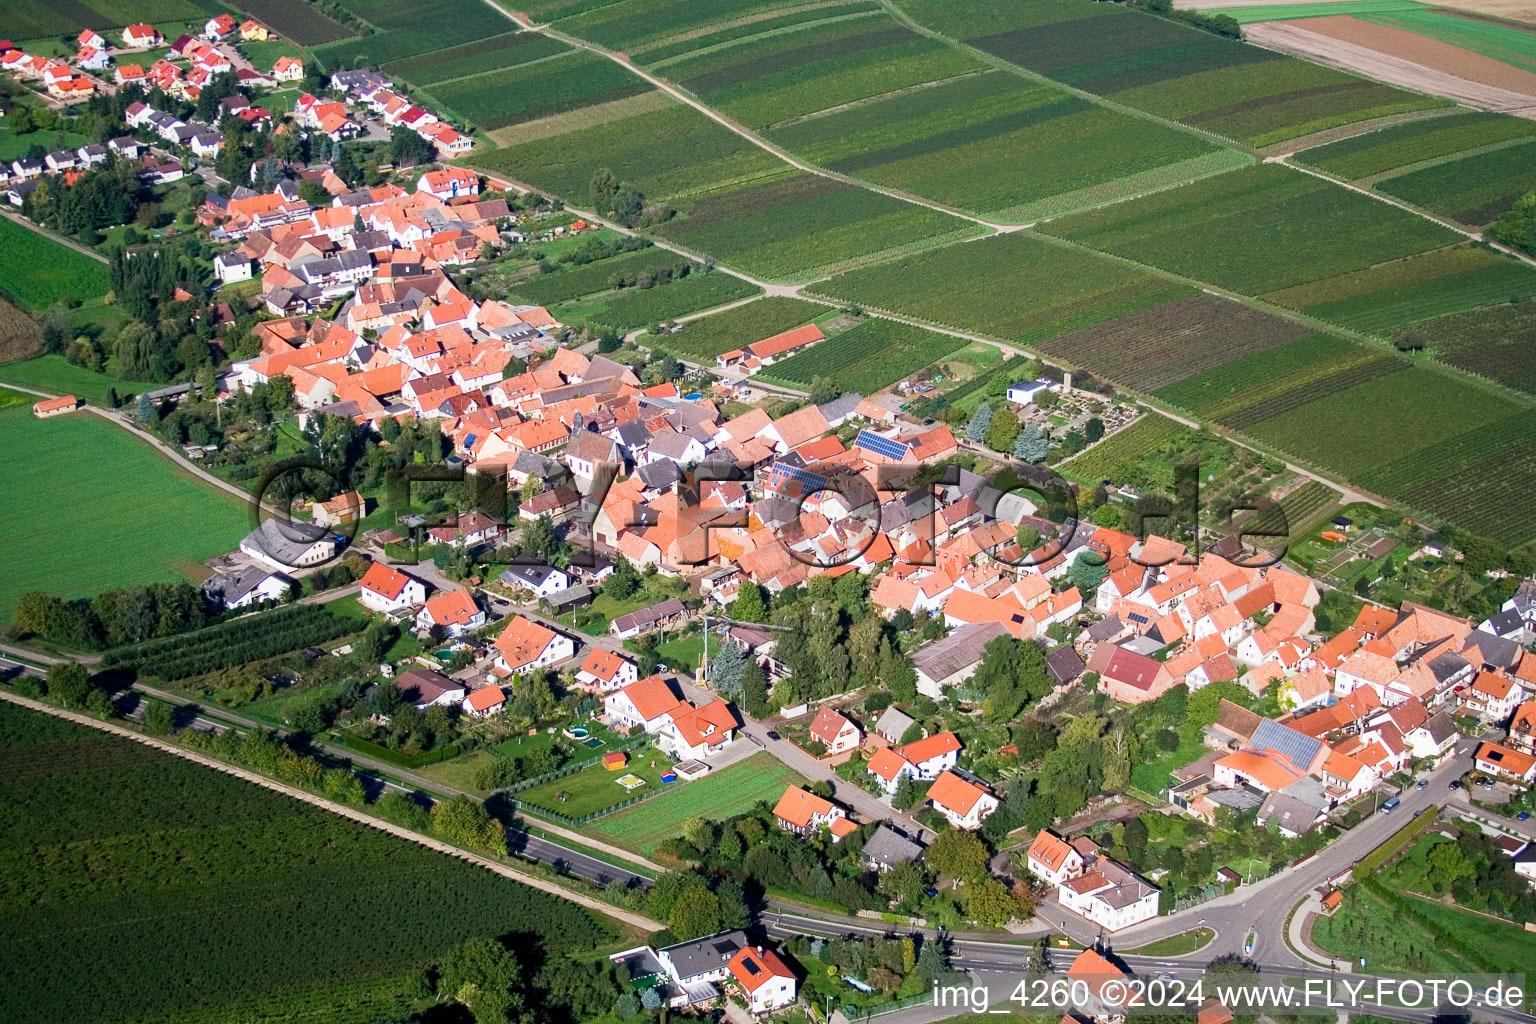 Aerial view of Village - view on the edge ofwine yards in Niederhorbach in the state Rhineland-Palatinate